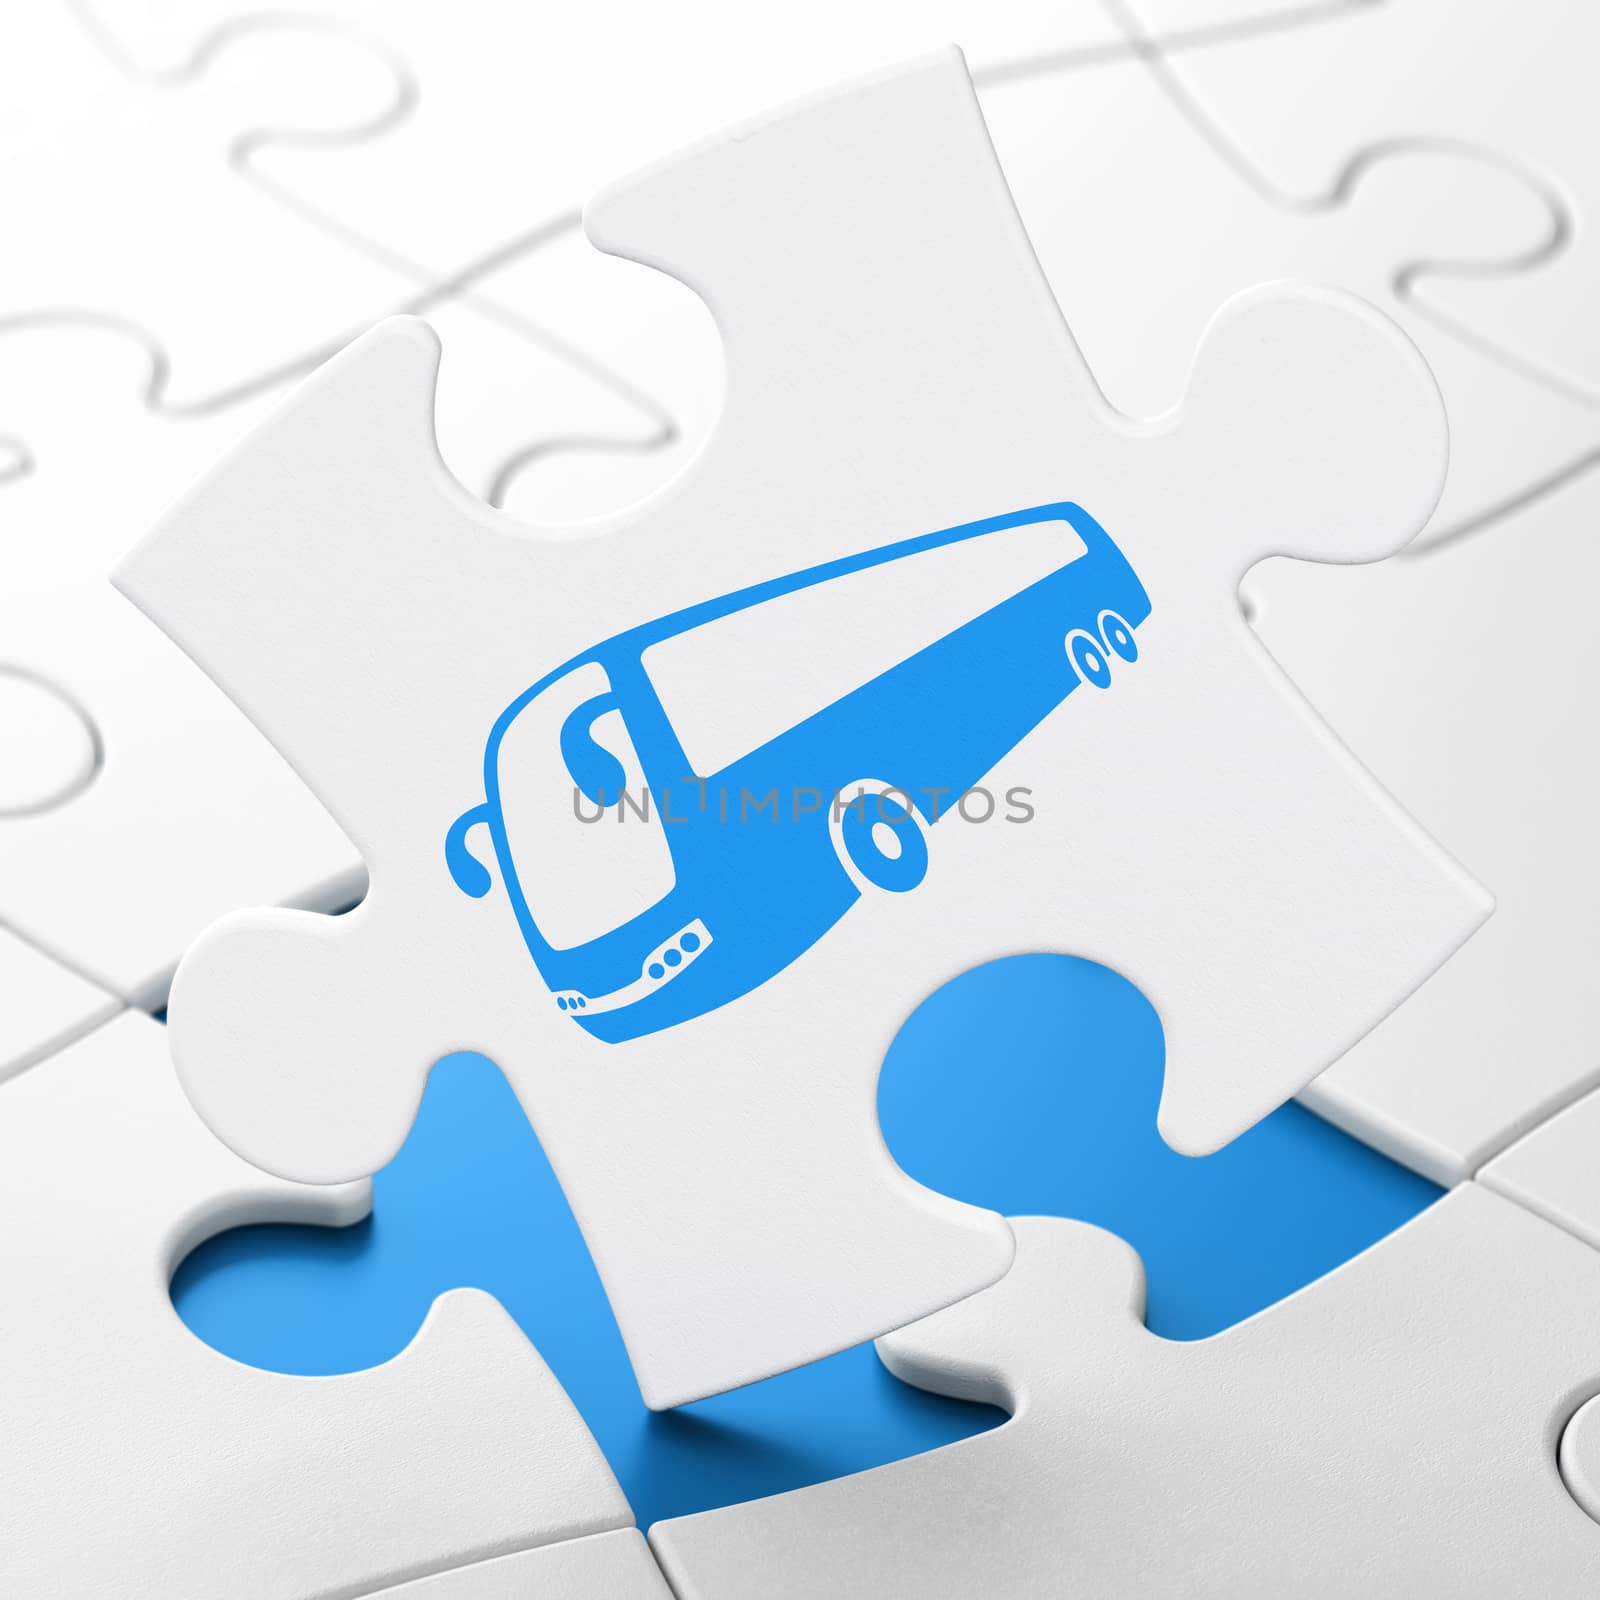 Vacation concept: Bus on White puzzle pieces background, 3d render